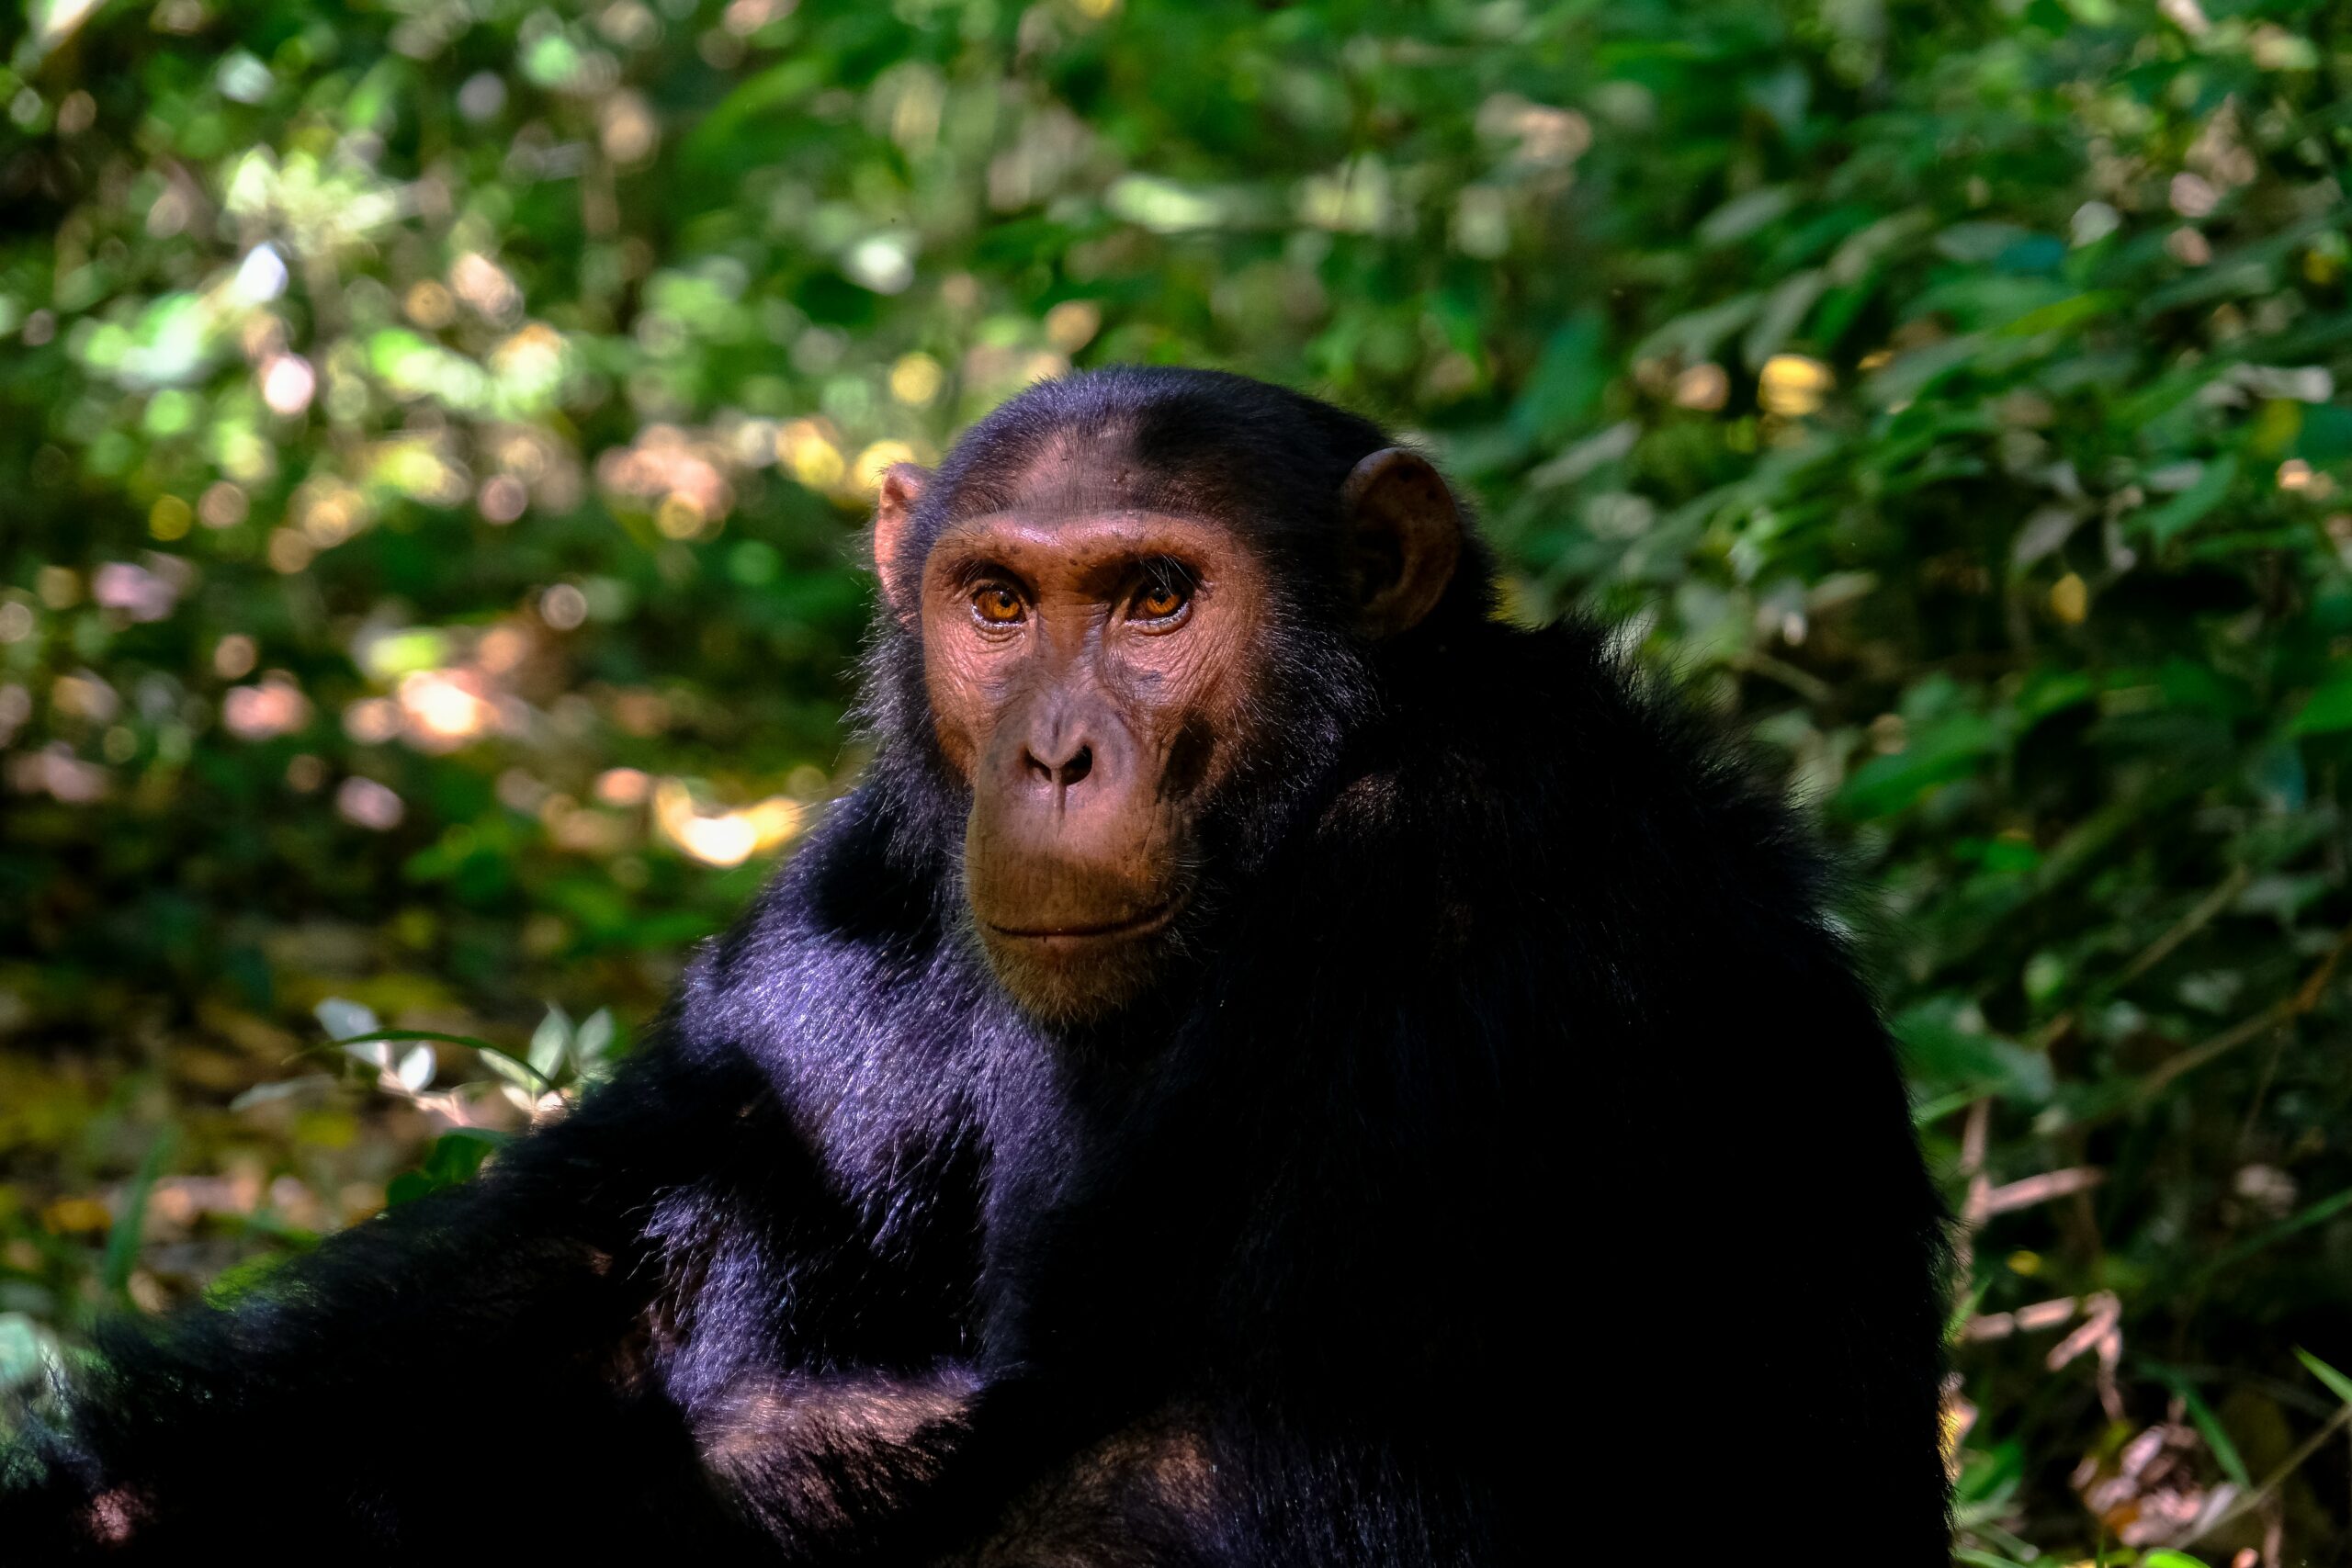 Lethal attacks on gorillas by chimpanzees  (part 3 of 4)